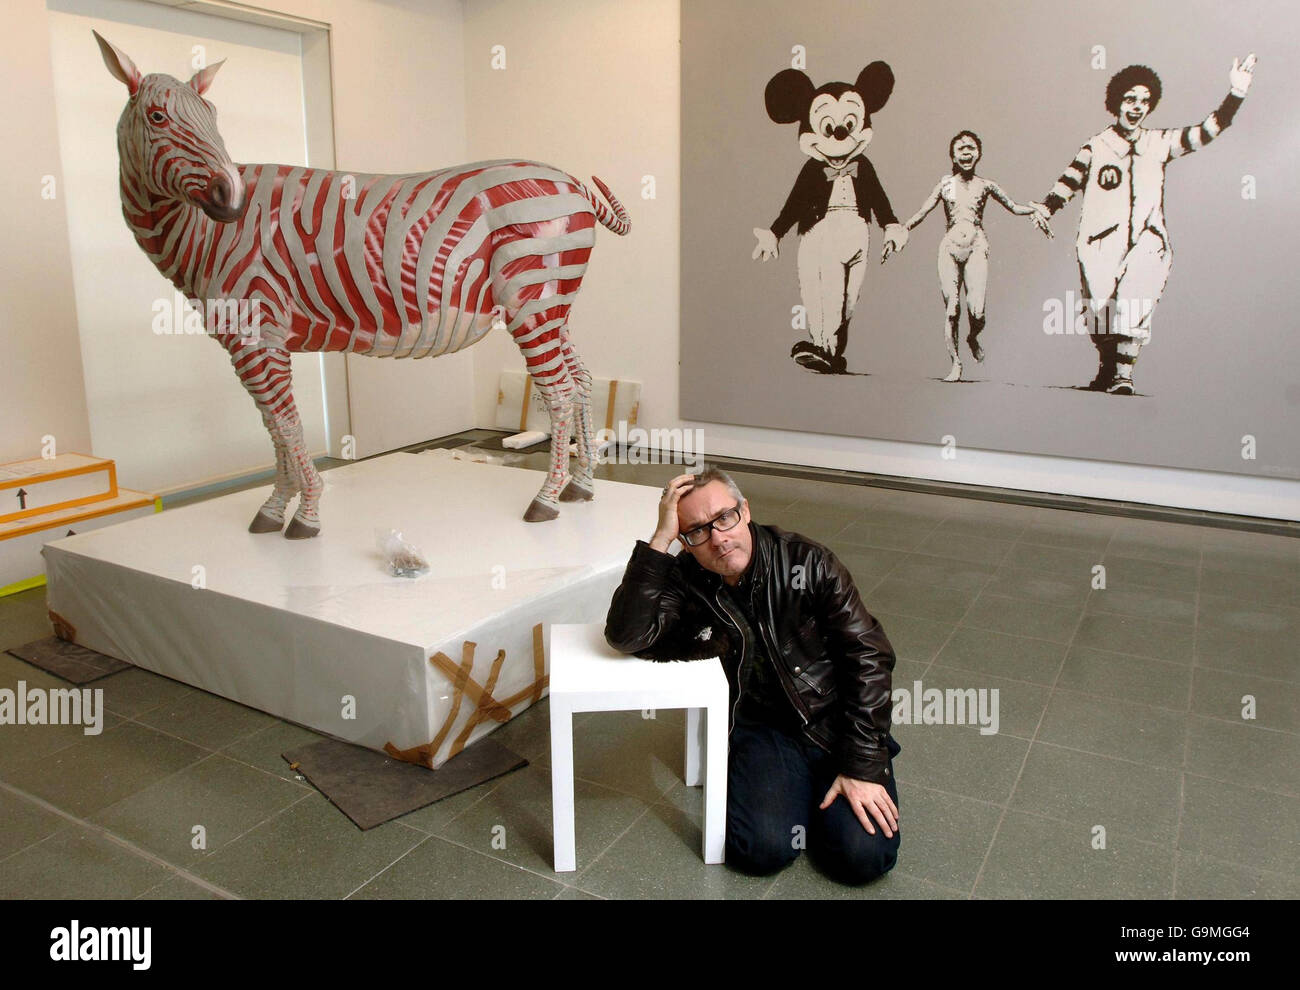 British artist Damien Hirst sits some works from 'murderme', his personal contemporary art collection, which he is exhibiting at London's Serpentine Gallery from tomorrow. Stock Photo